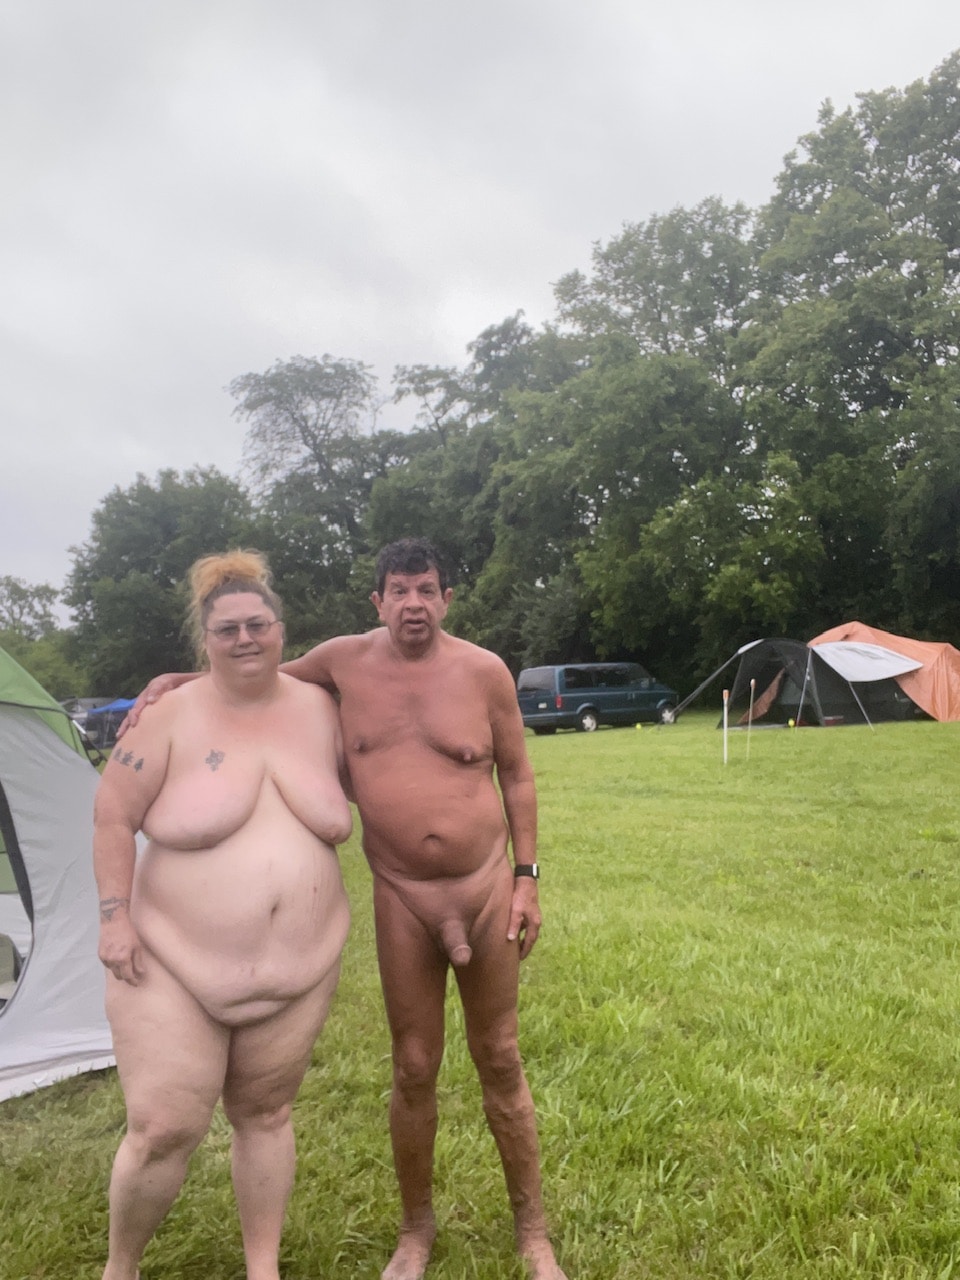 daughter nude spy - We love camping in the nude - Real Amateurs